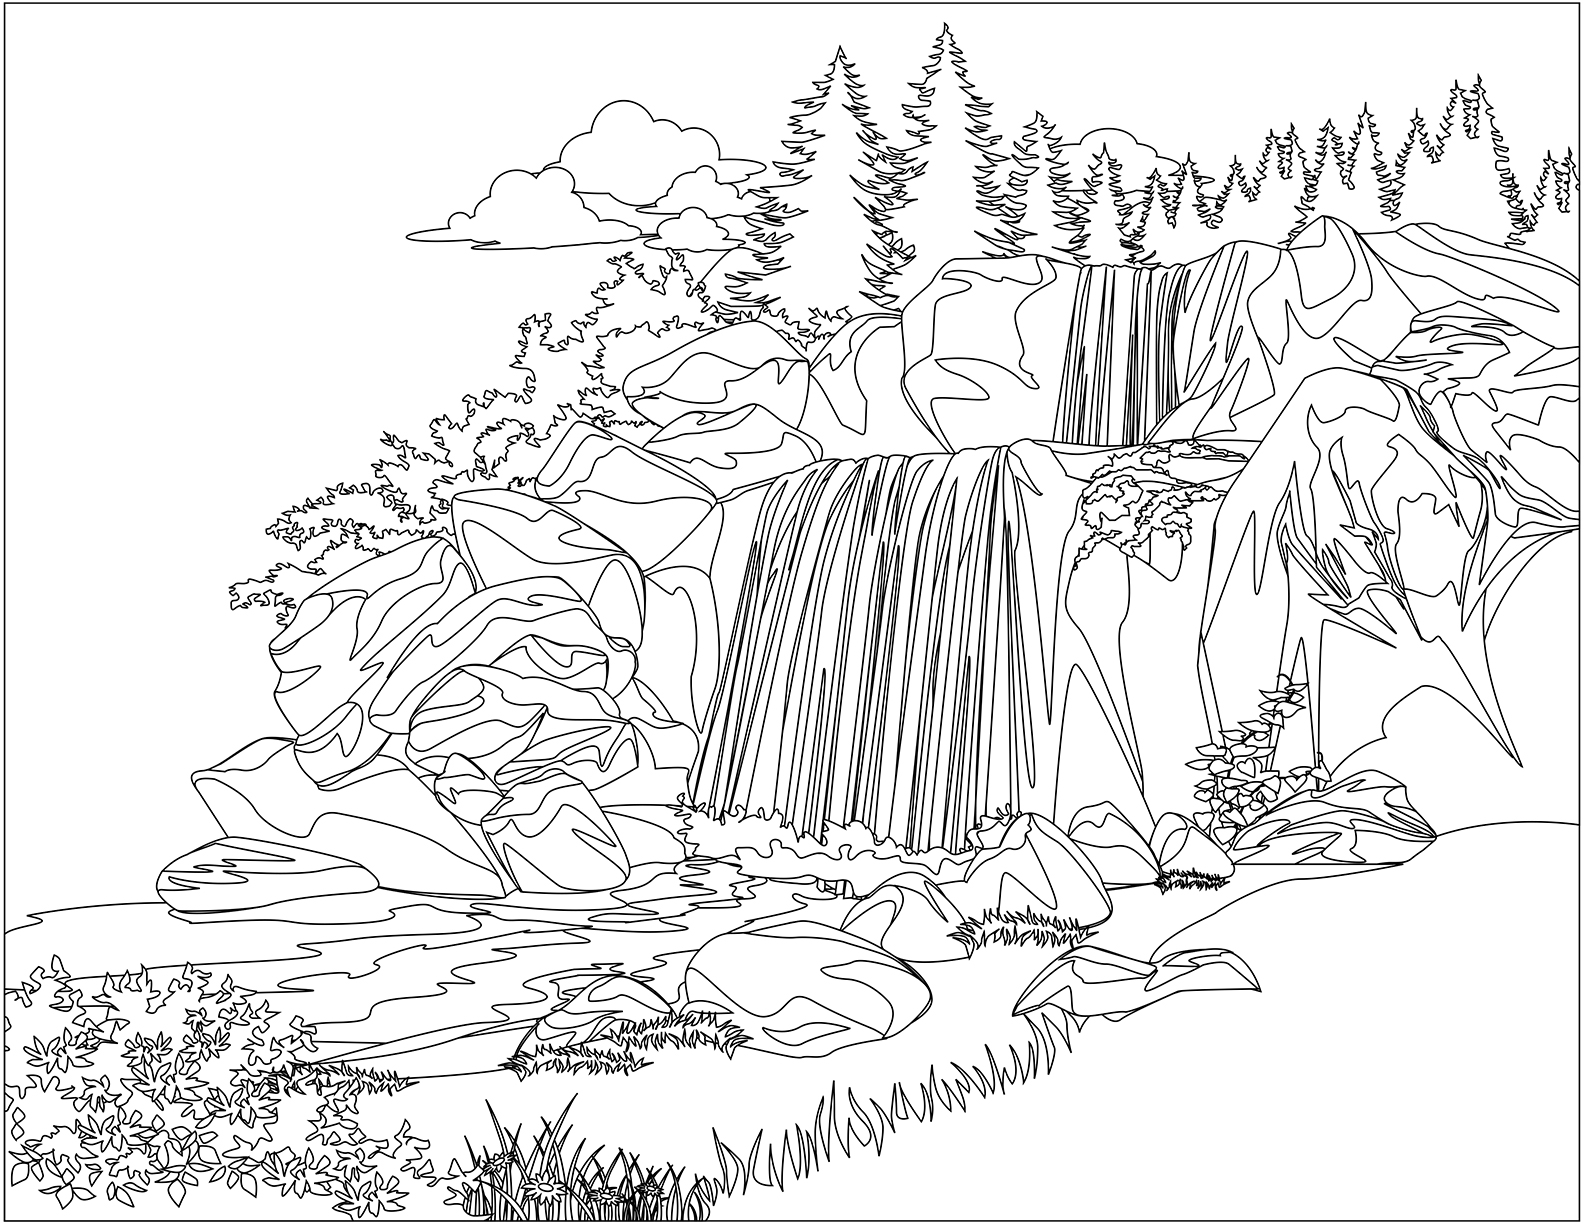 Waterfall Drawing For Kids at GetDrawings.com | Free for personal use